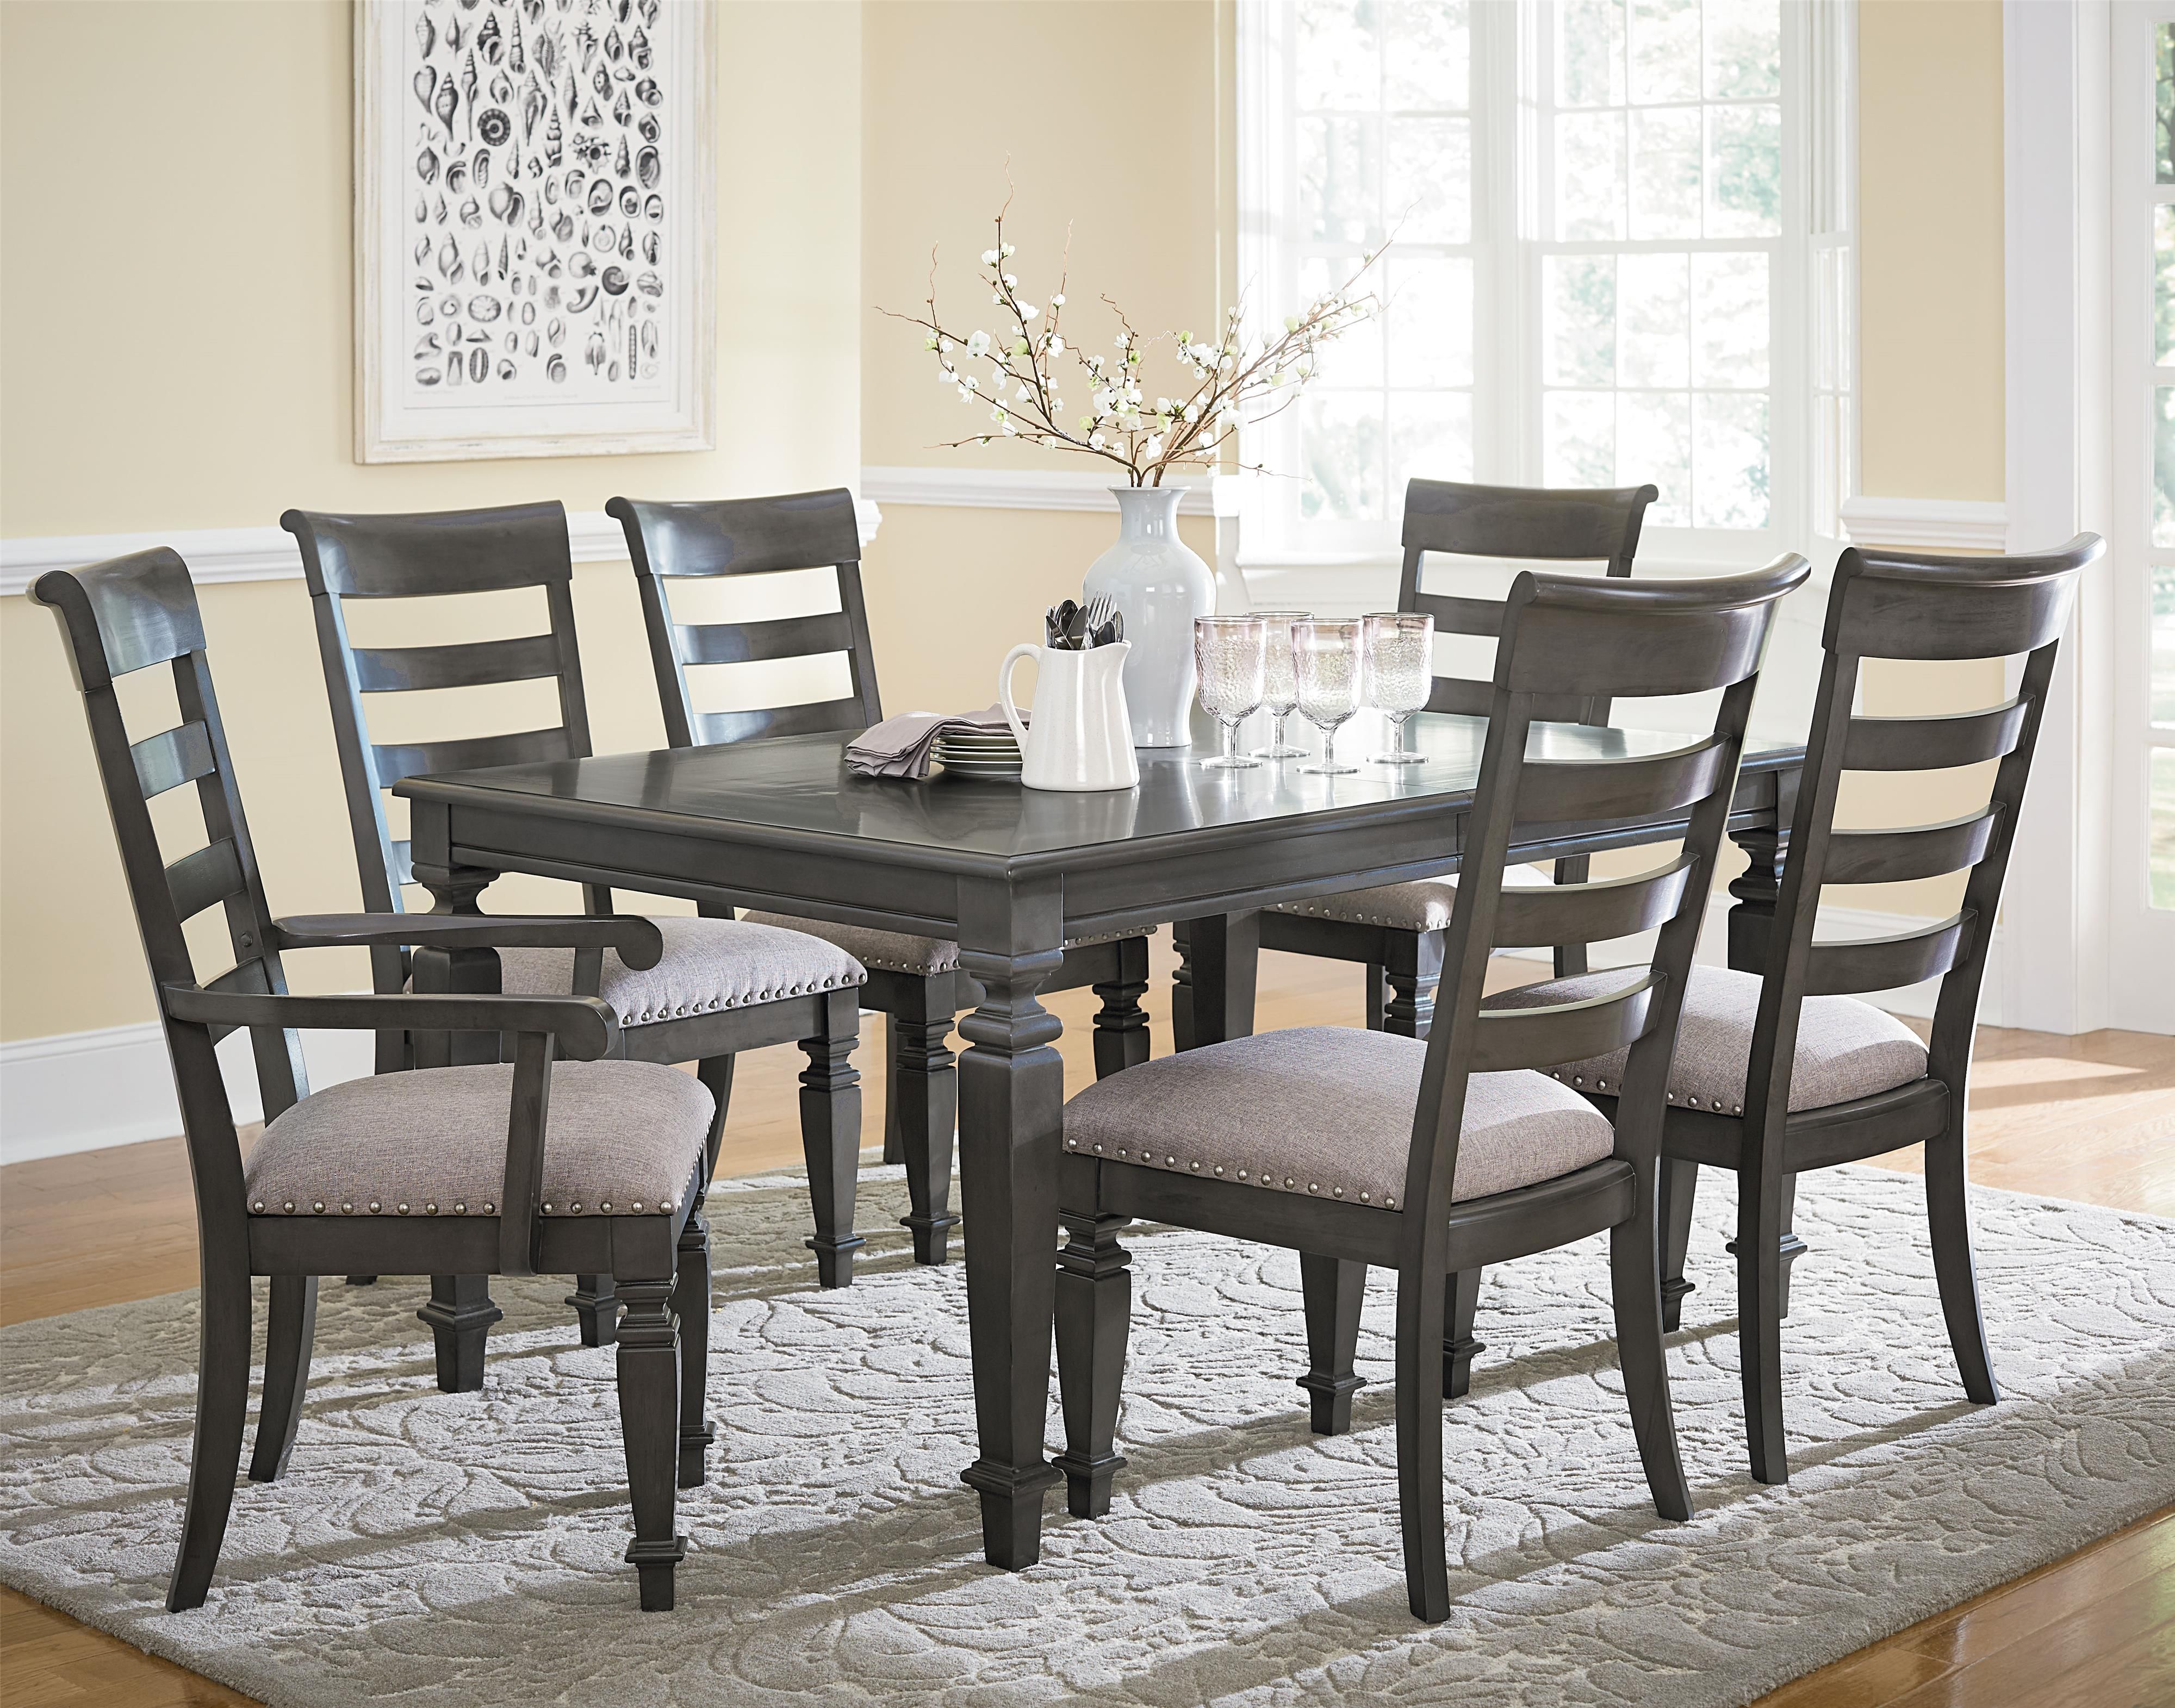 Traditional Seven Piece Dining Setstandard Furniture | Wolf And For Latest Parquet 7 Piece Dining Sets (View 5 of 20)